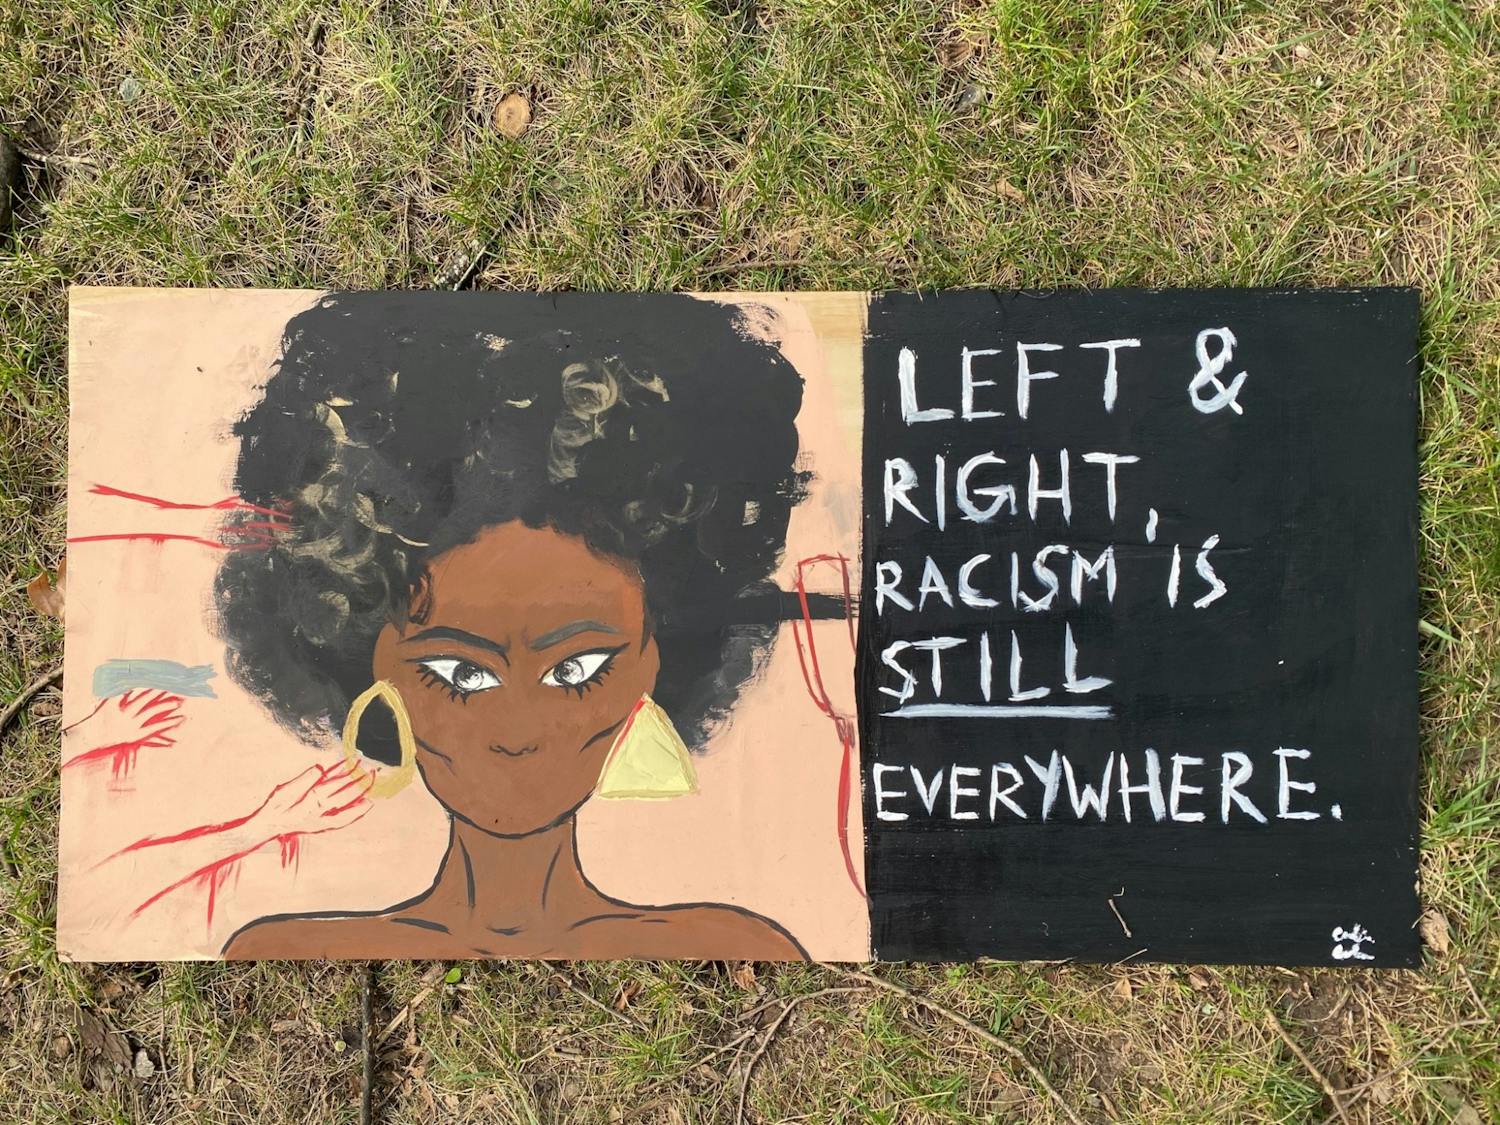 One of the Black Lives Matter murals painted to _____ on ____.